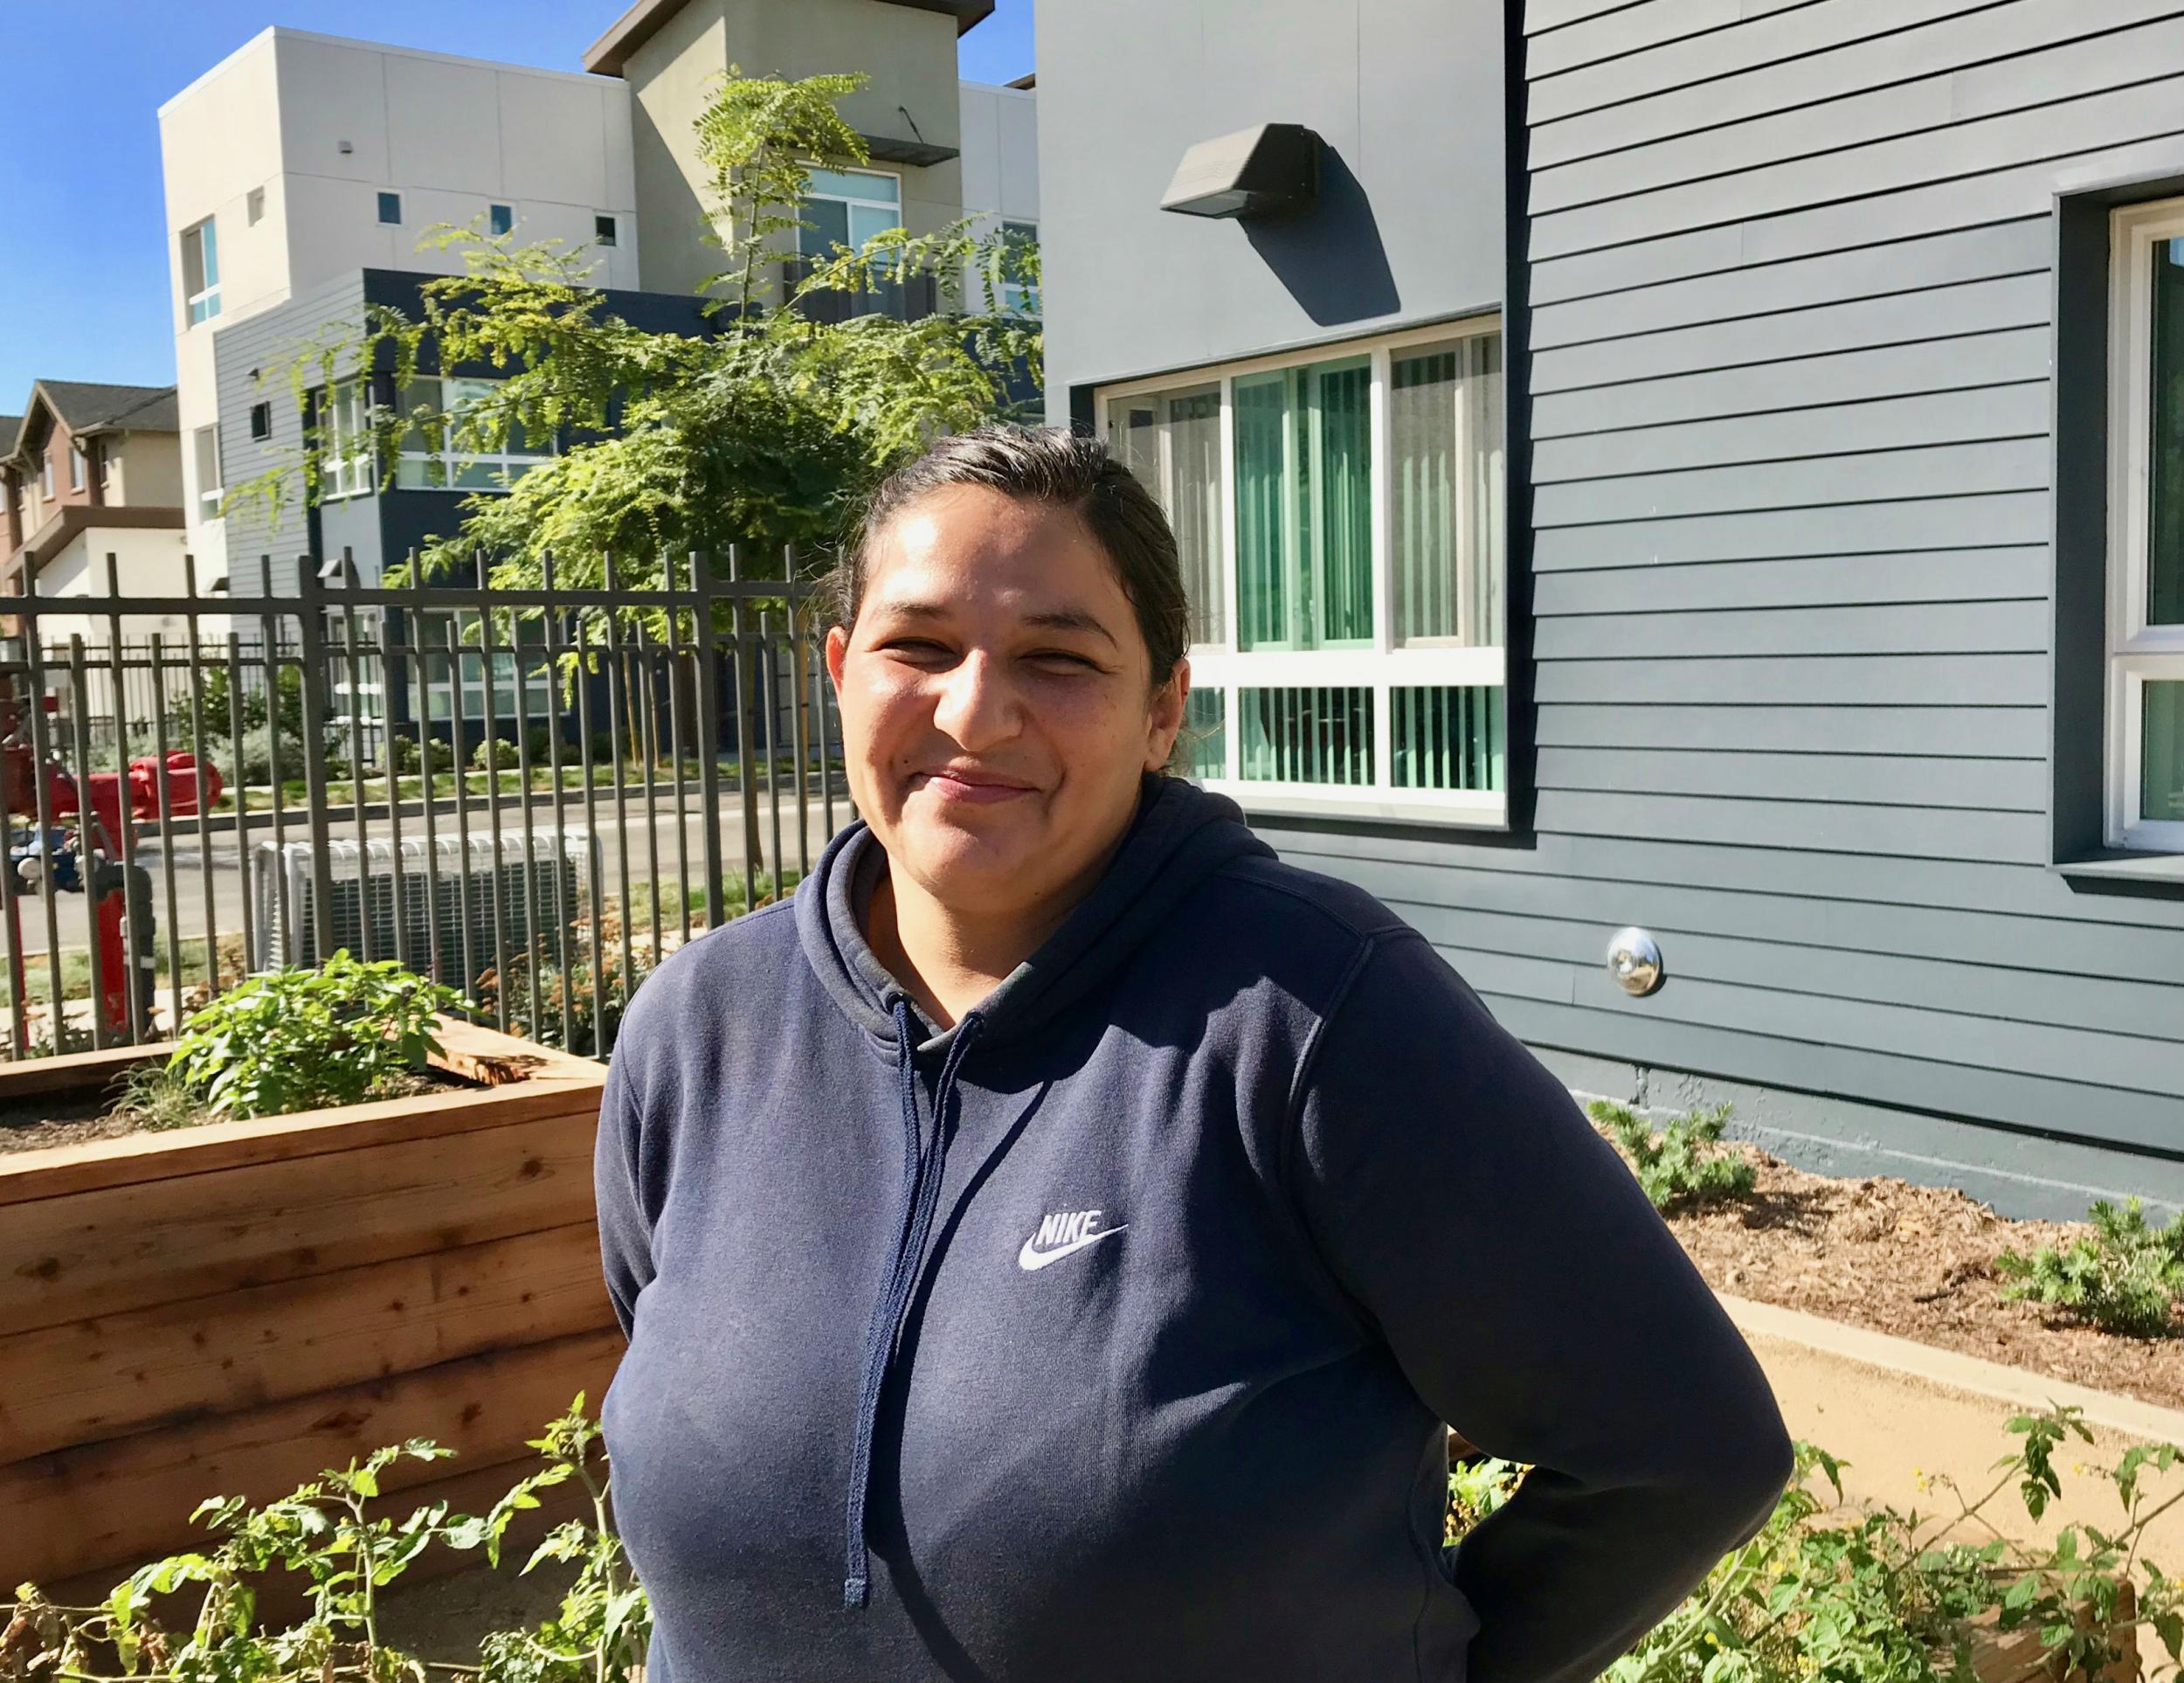 Danielle Vasquez' experience means she supports any measures that help the homeless